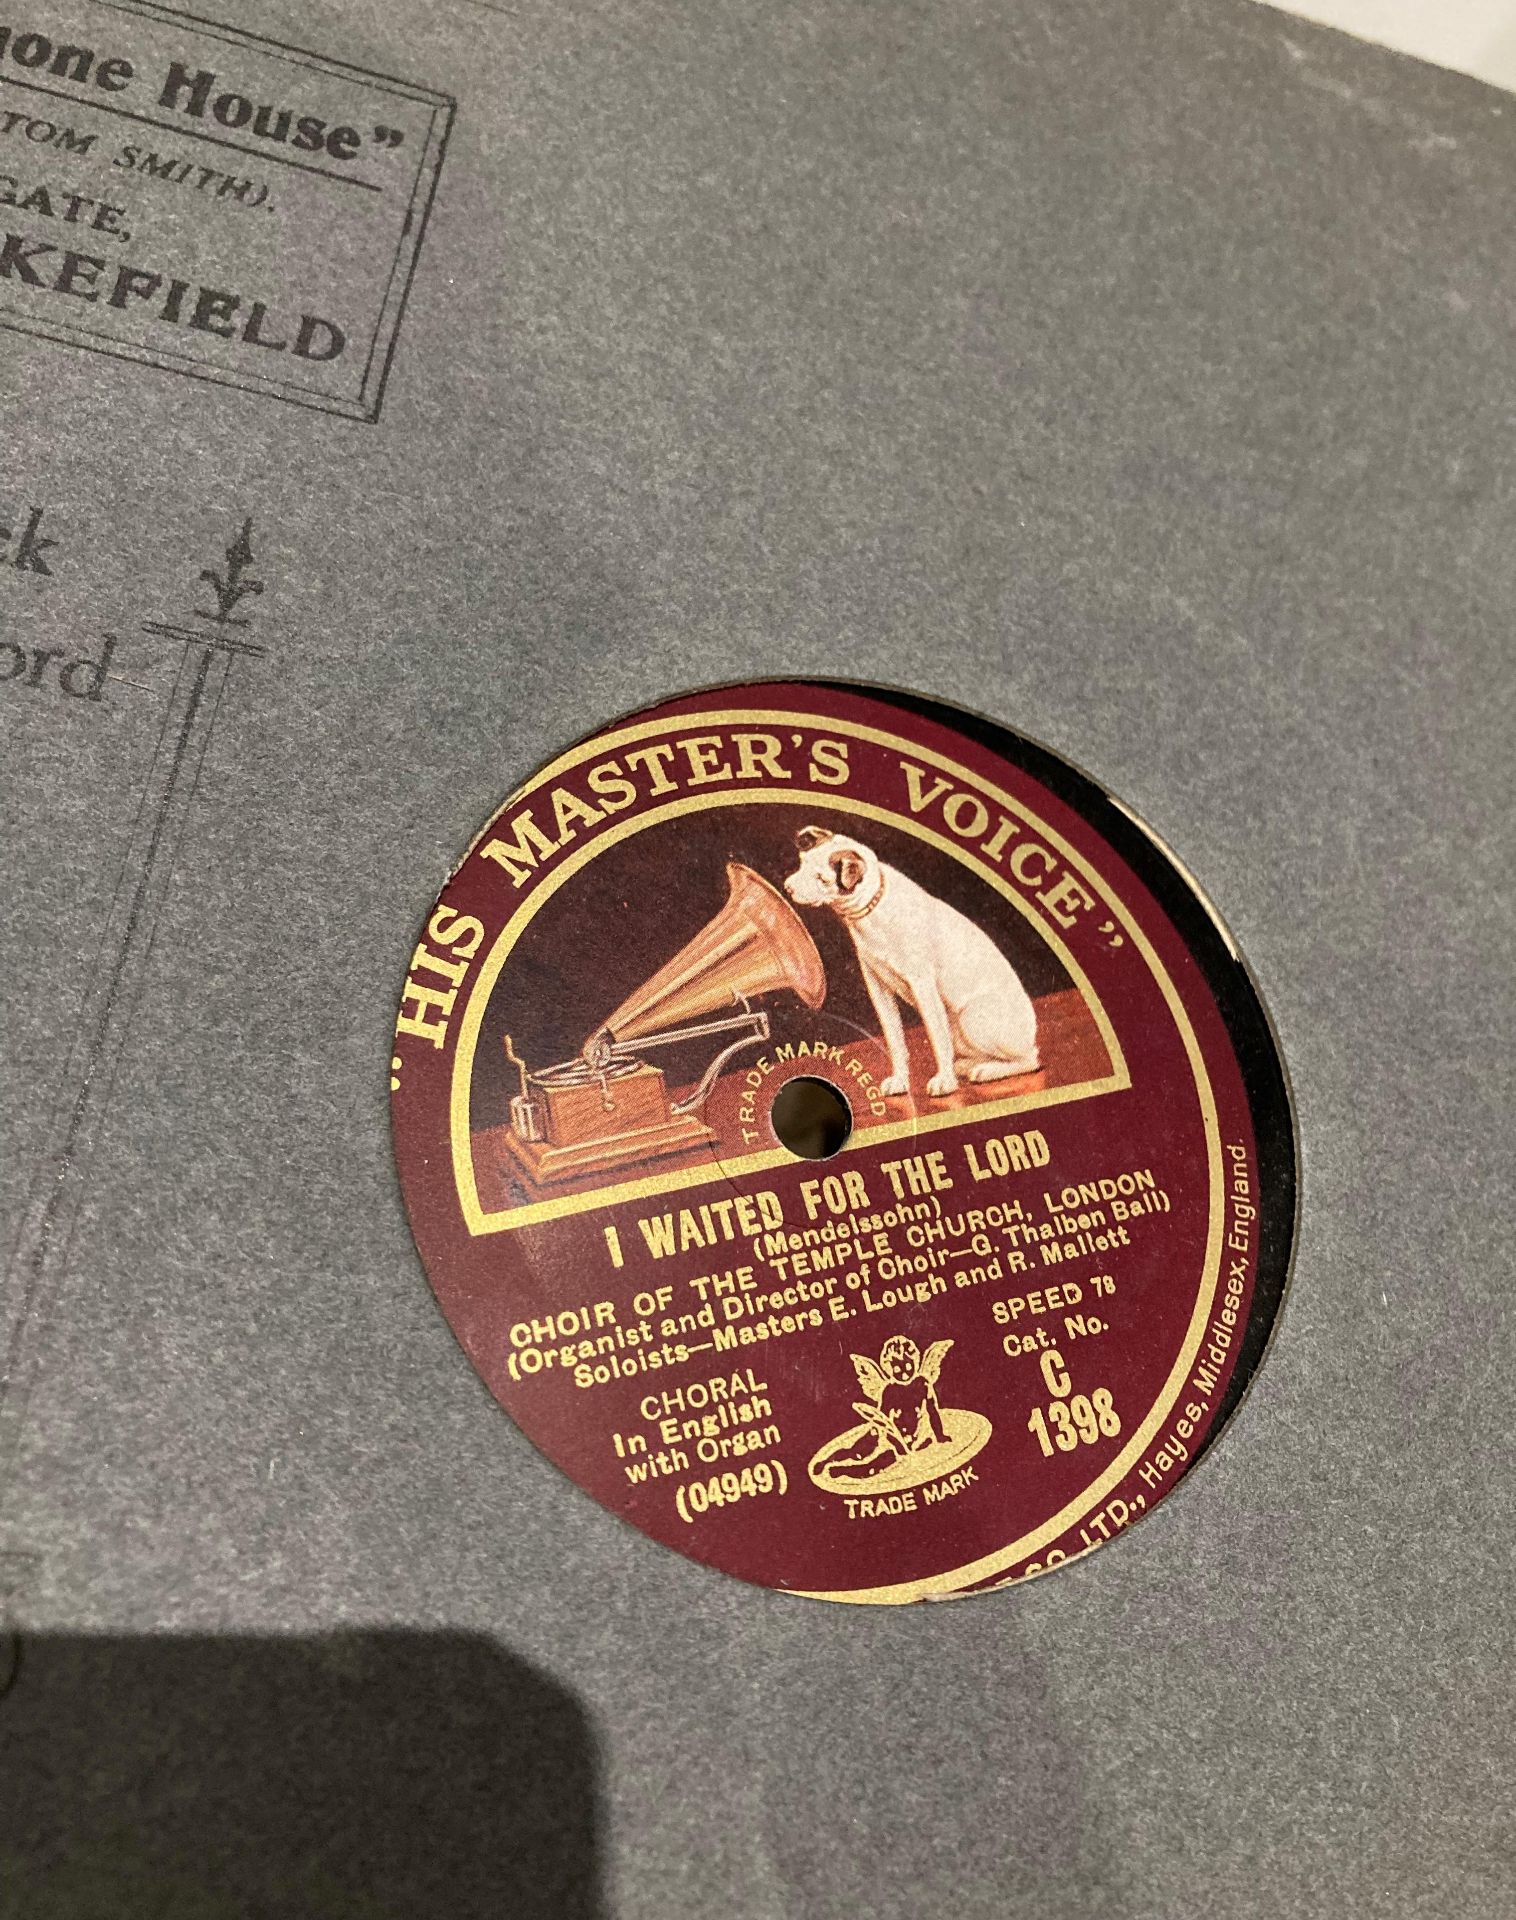 Approximately fifty assorted 78rpm vinyl LPS (Saleroom location: S3 T2) - Image 6 of 6